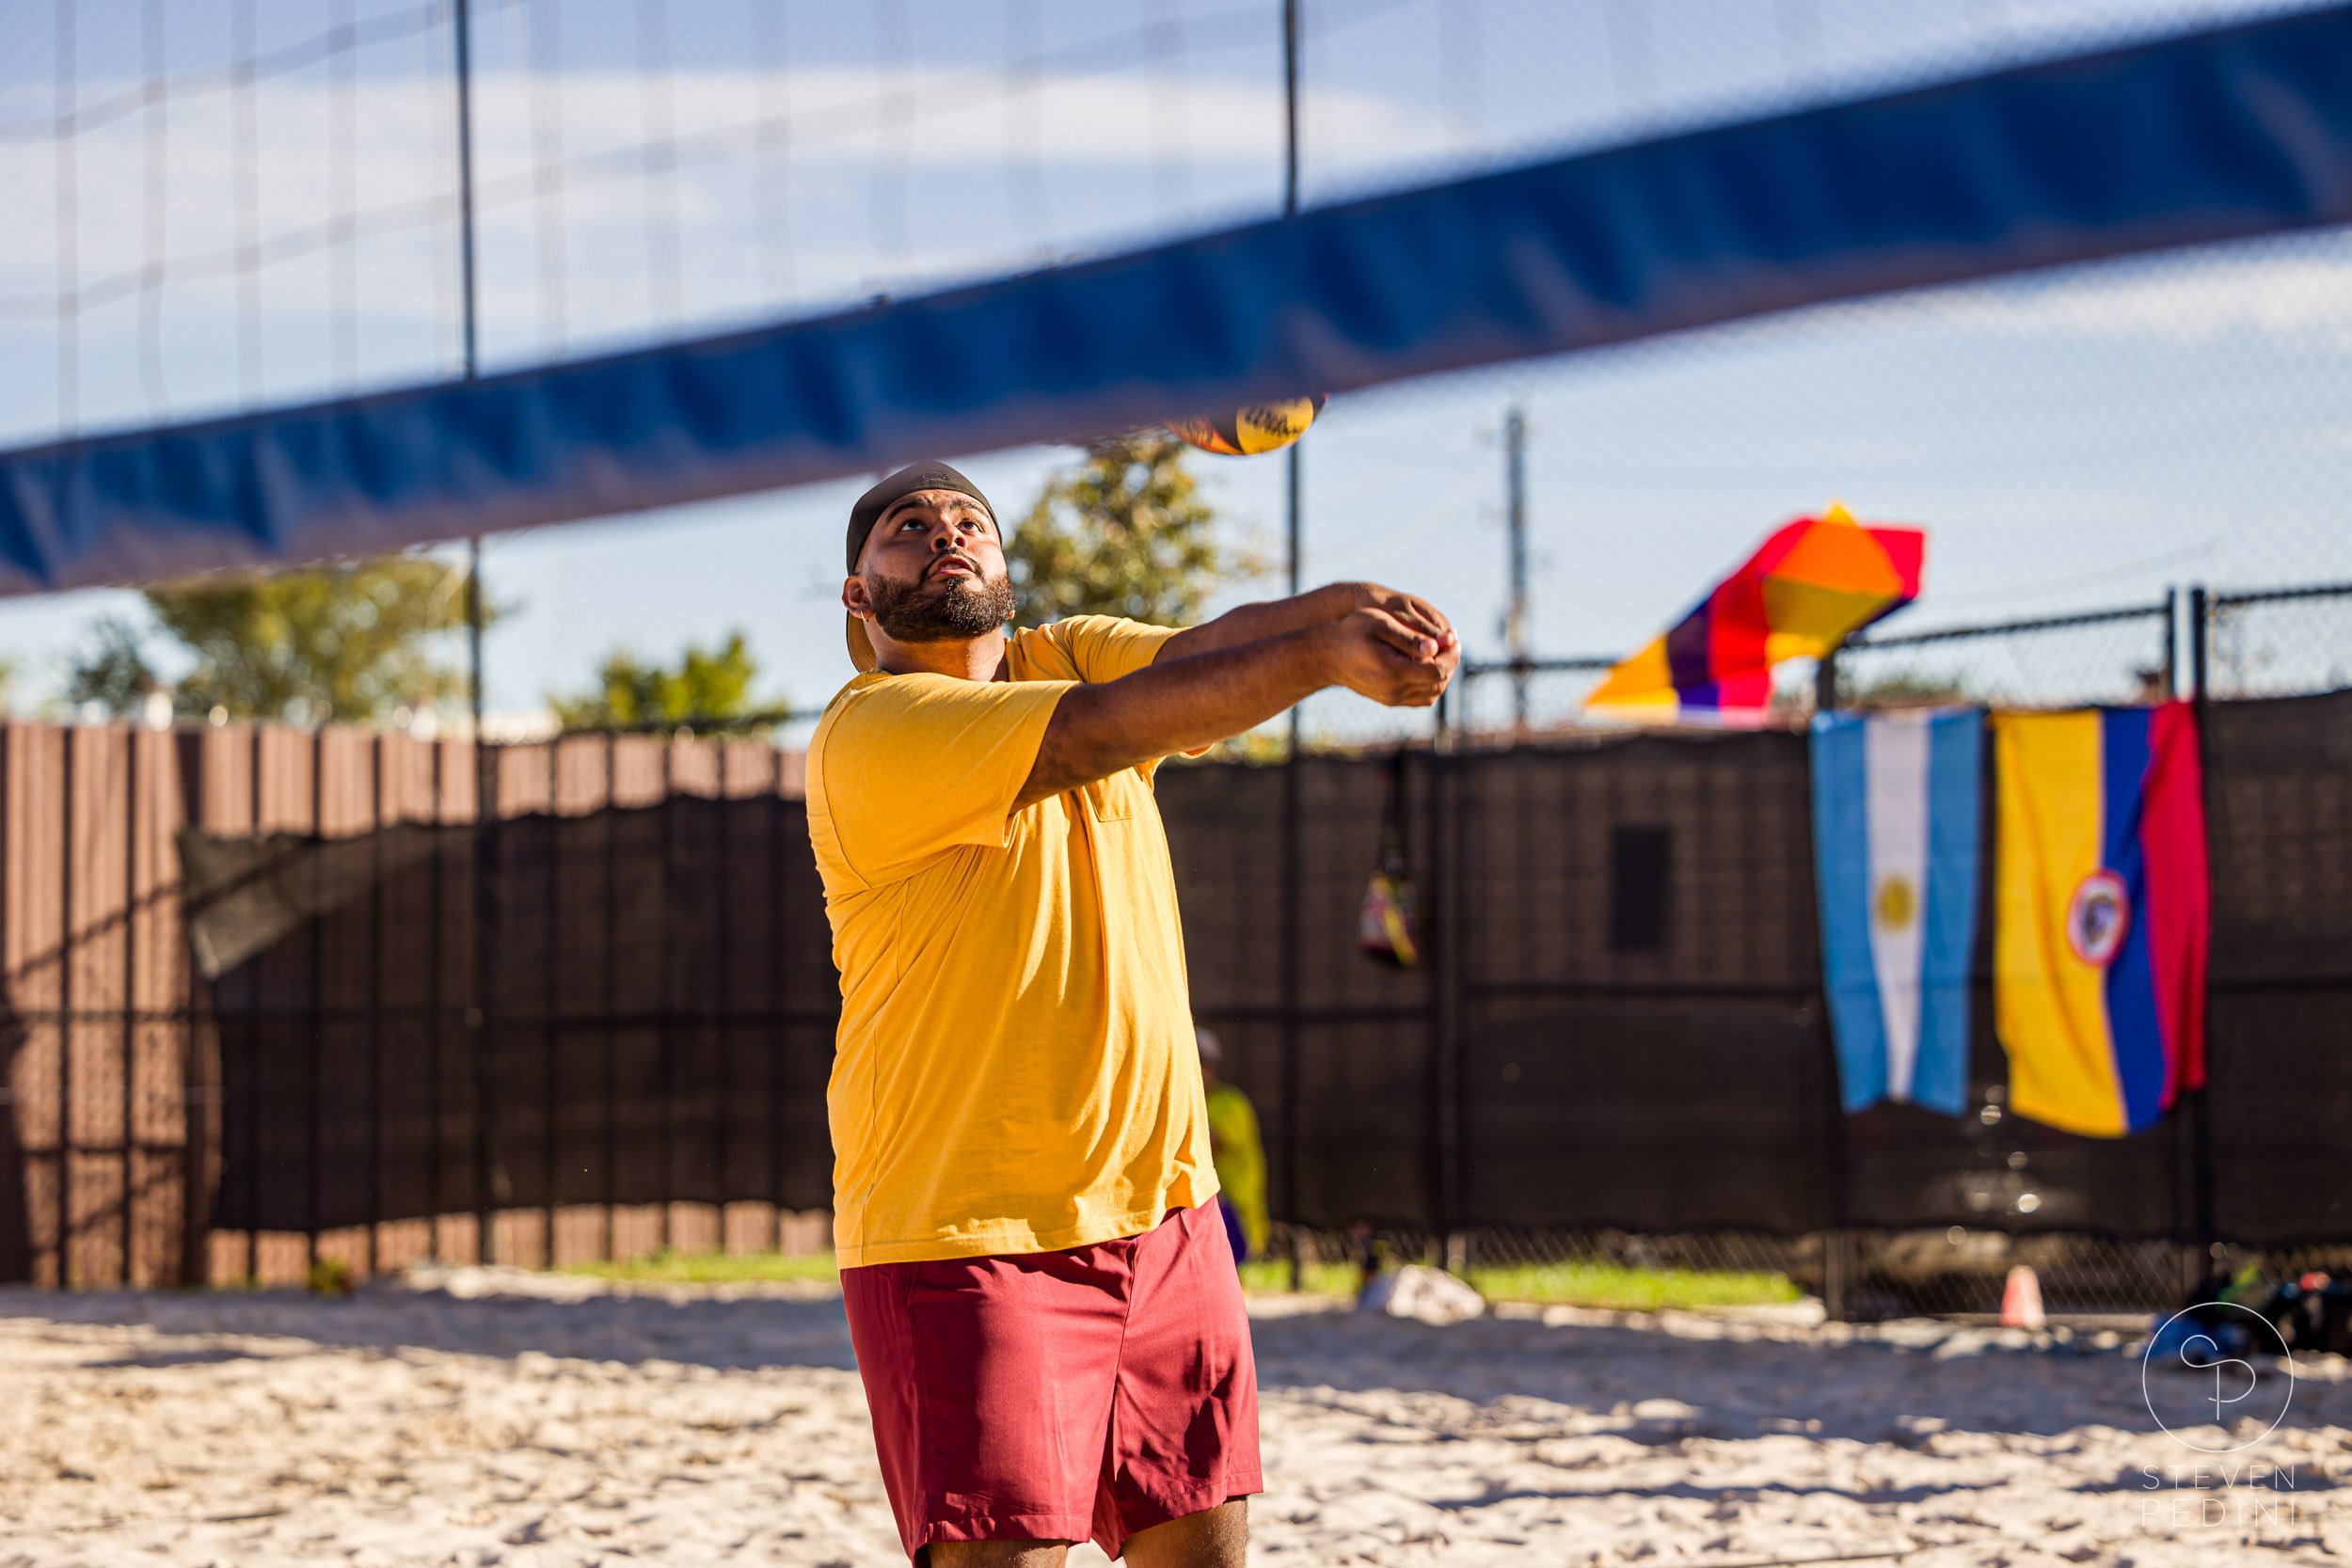 Steven Pedini Photography - Bumpy Pickle - Sand Volleyball - Houston TX - World Cup of Volleyball - 00004.jpg